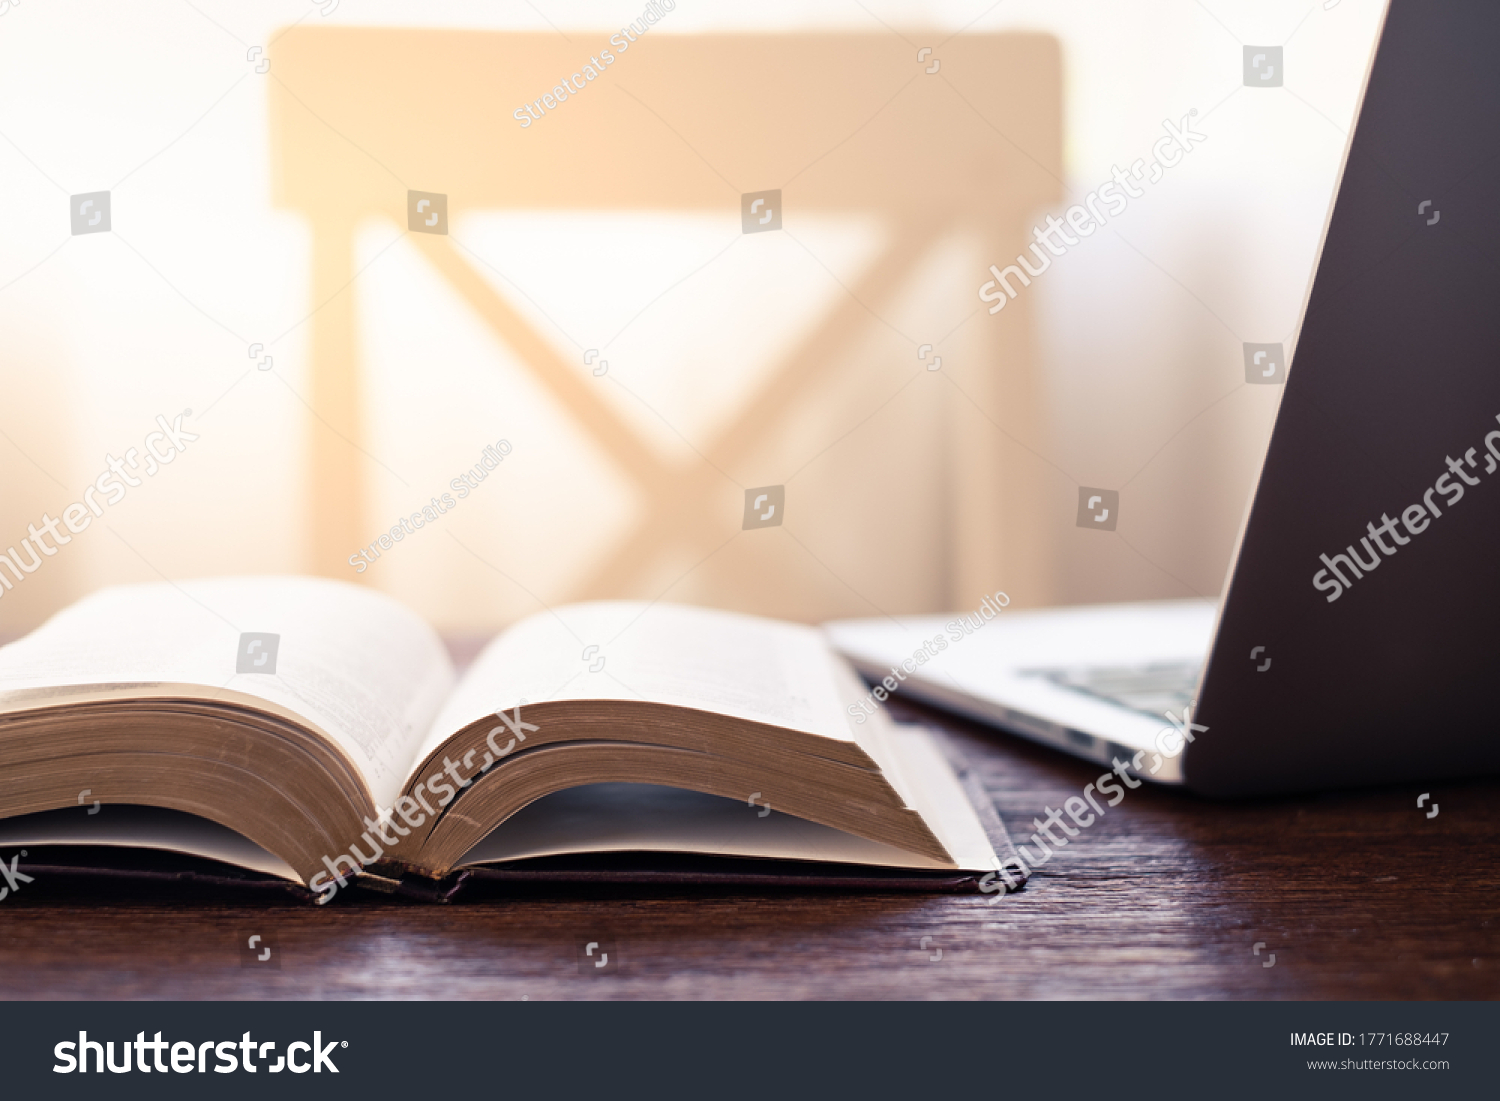 Workplace indoor with book or Holy Bible and laptop on the wooden desk #1771688447